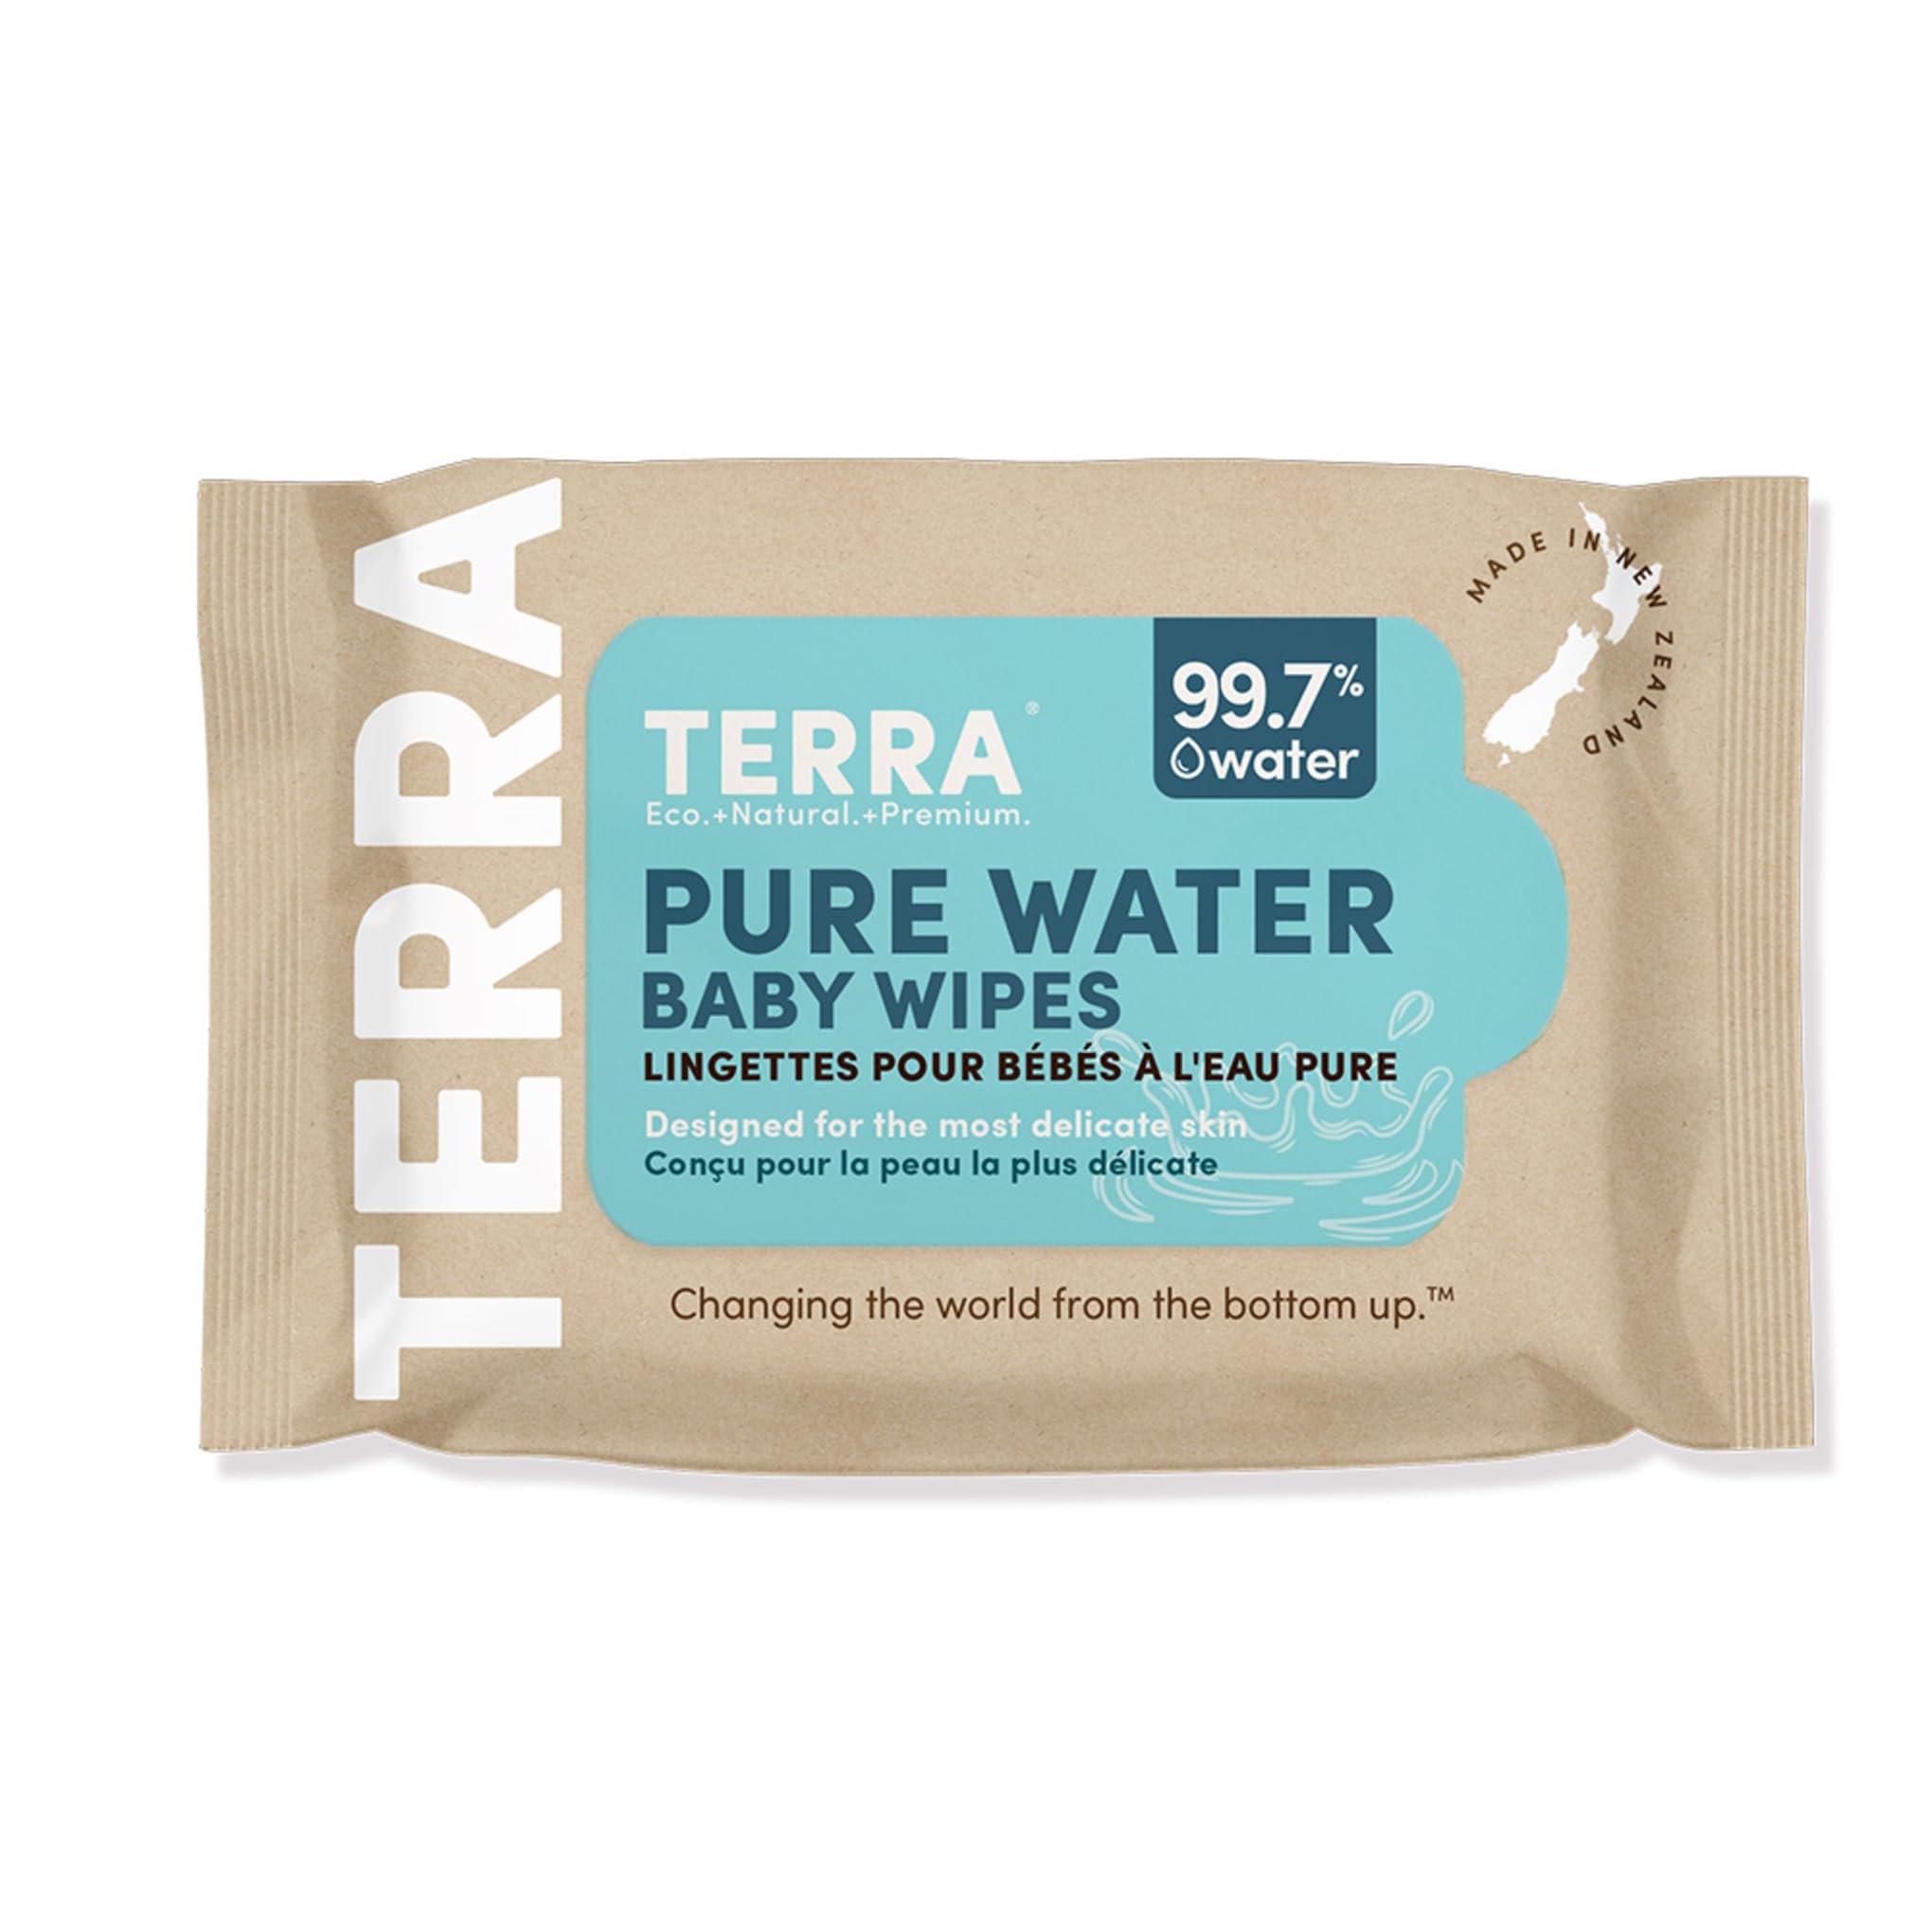 Terra Bamboo Baby Wipes: Pure Water Wipes, 99.7% Pure New Zealand Water, 100% Biodegradable Bamboo Fiber, 0% Plastic, Unscented Baby Wipes for Sensitive Skin, 1 Pack of 24 Wipes